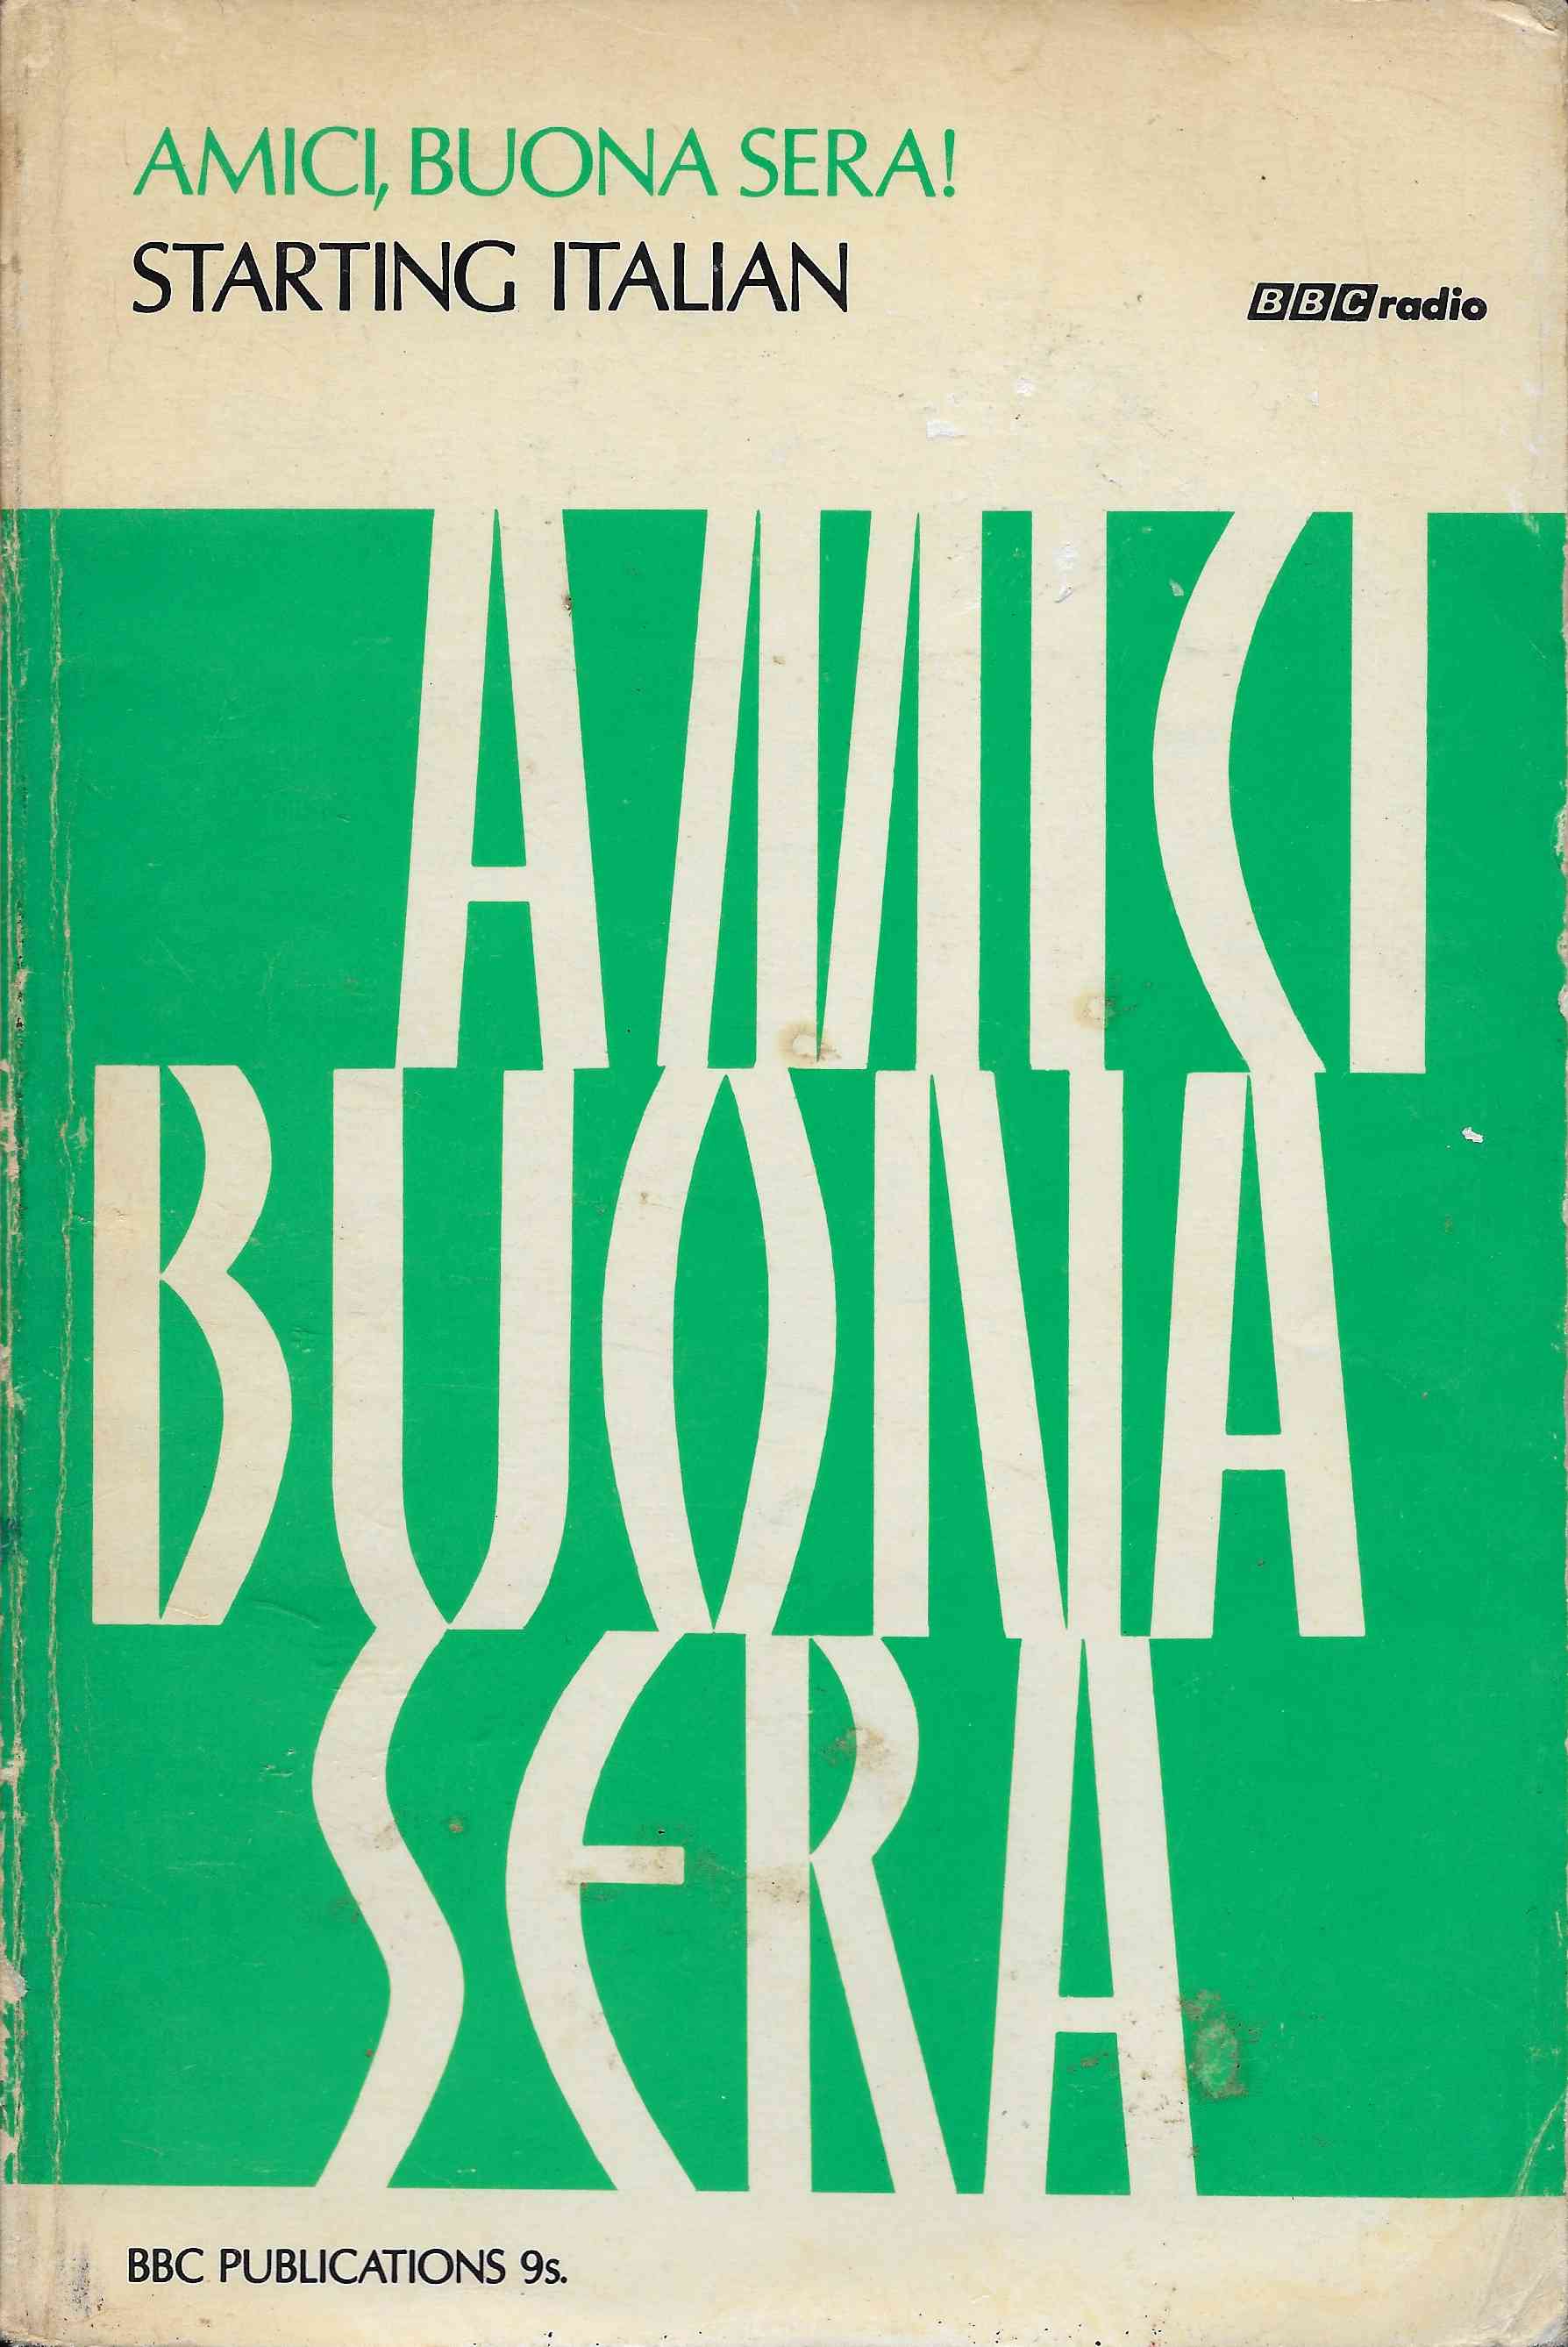 Picture of SBN 563 08559 2 Amici, buona sera! by artist Hugh Shankland / Ernesto Mussi from the BBC books - Records and Tapes library